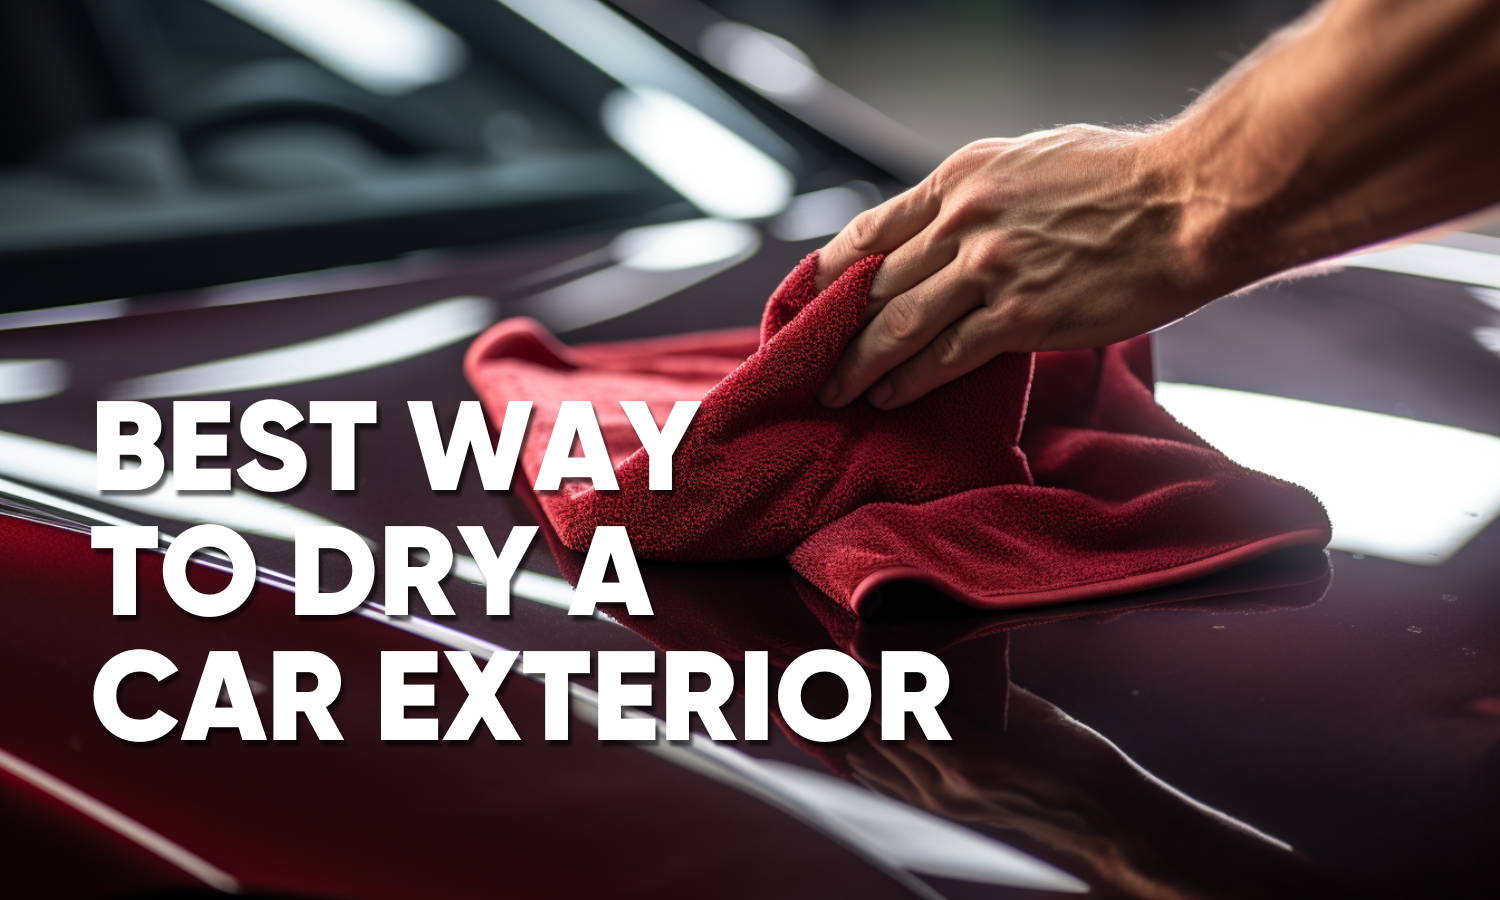 Best Way to Dry a Car Exterior: No Spots, Streaks, or Scratches